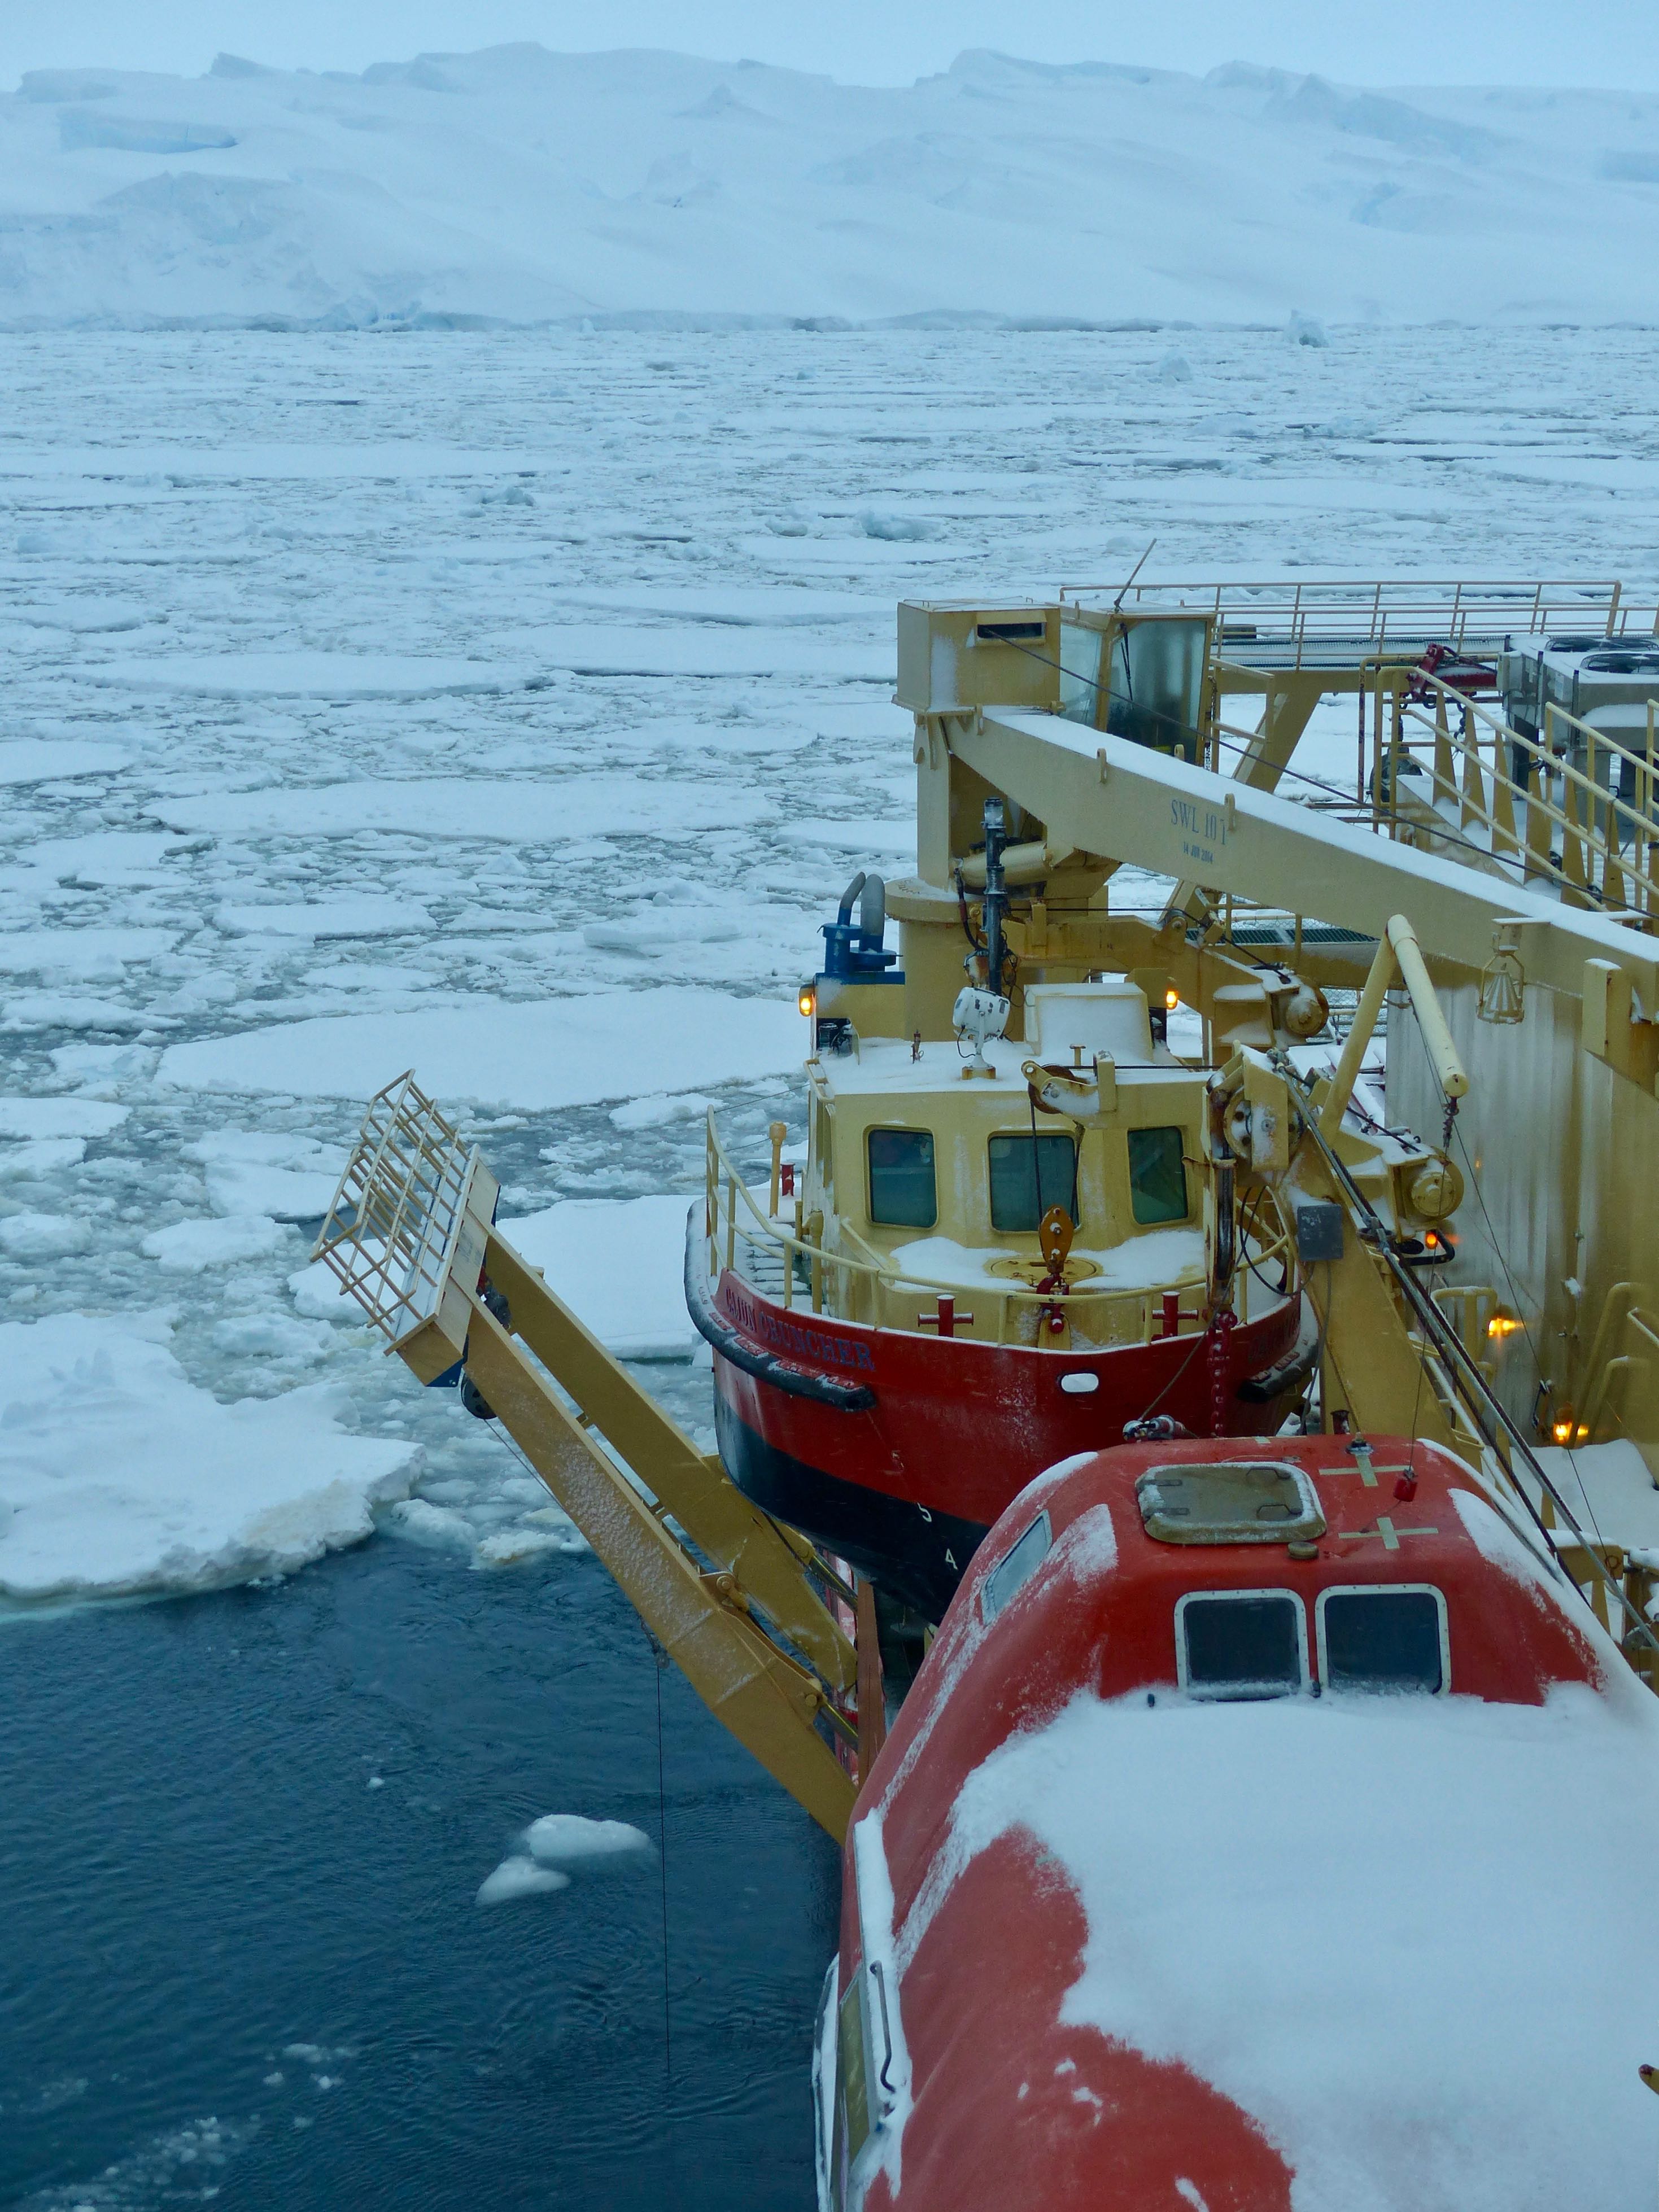 The Palmer sits a short distance from a giant iceberg and Thwaites ice shelf within sea ice that has moved here in the last few hours, beginning the ship's retrieval of the Hugin. Photo credit: Tasha Snow